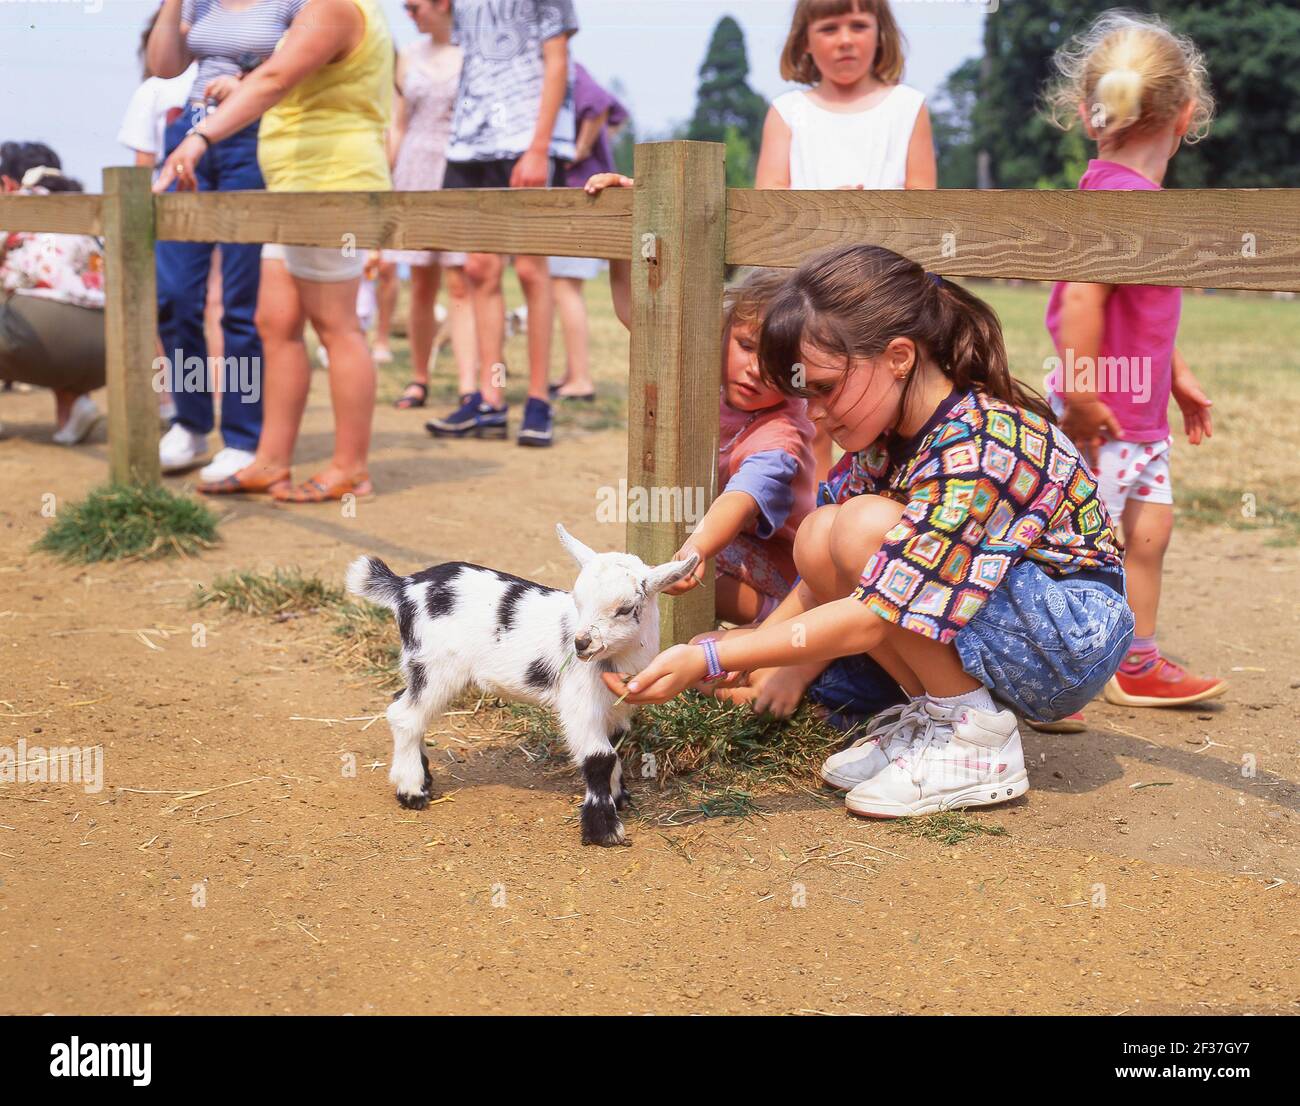 Young girl feeding baby goat in Children's Farmyard, Cotswold Wildlife Park & Gardens, Burford, Wiltshire, England, United Kingdom Stock Photo